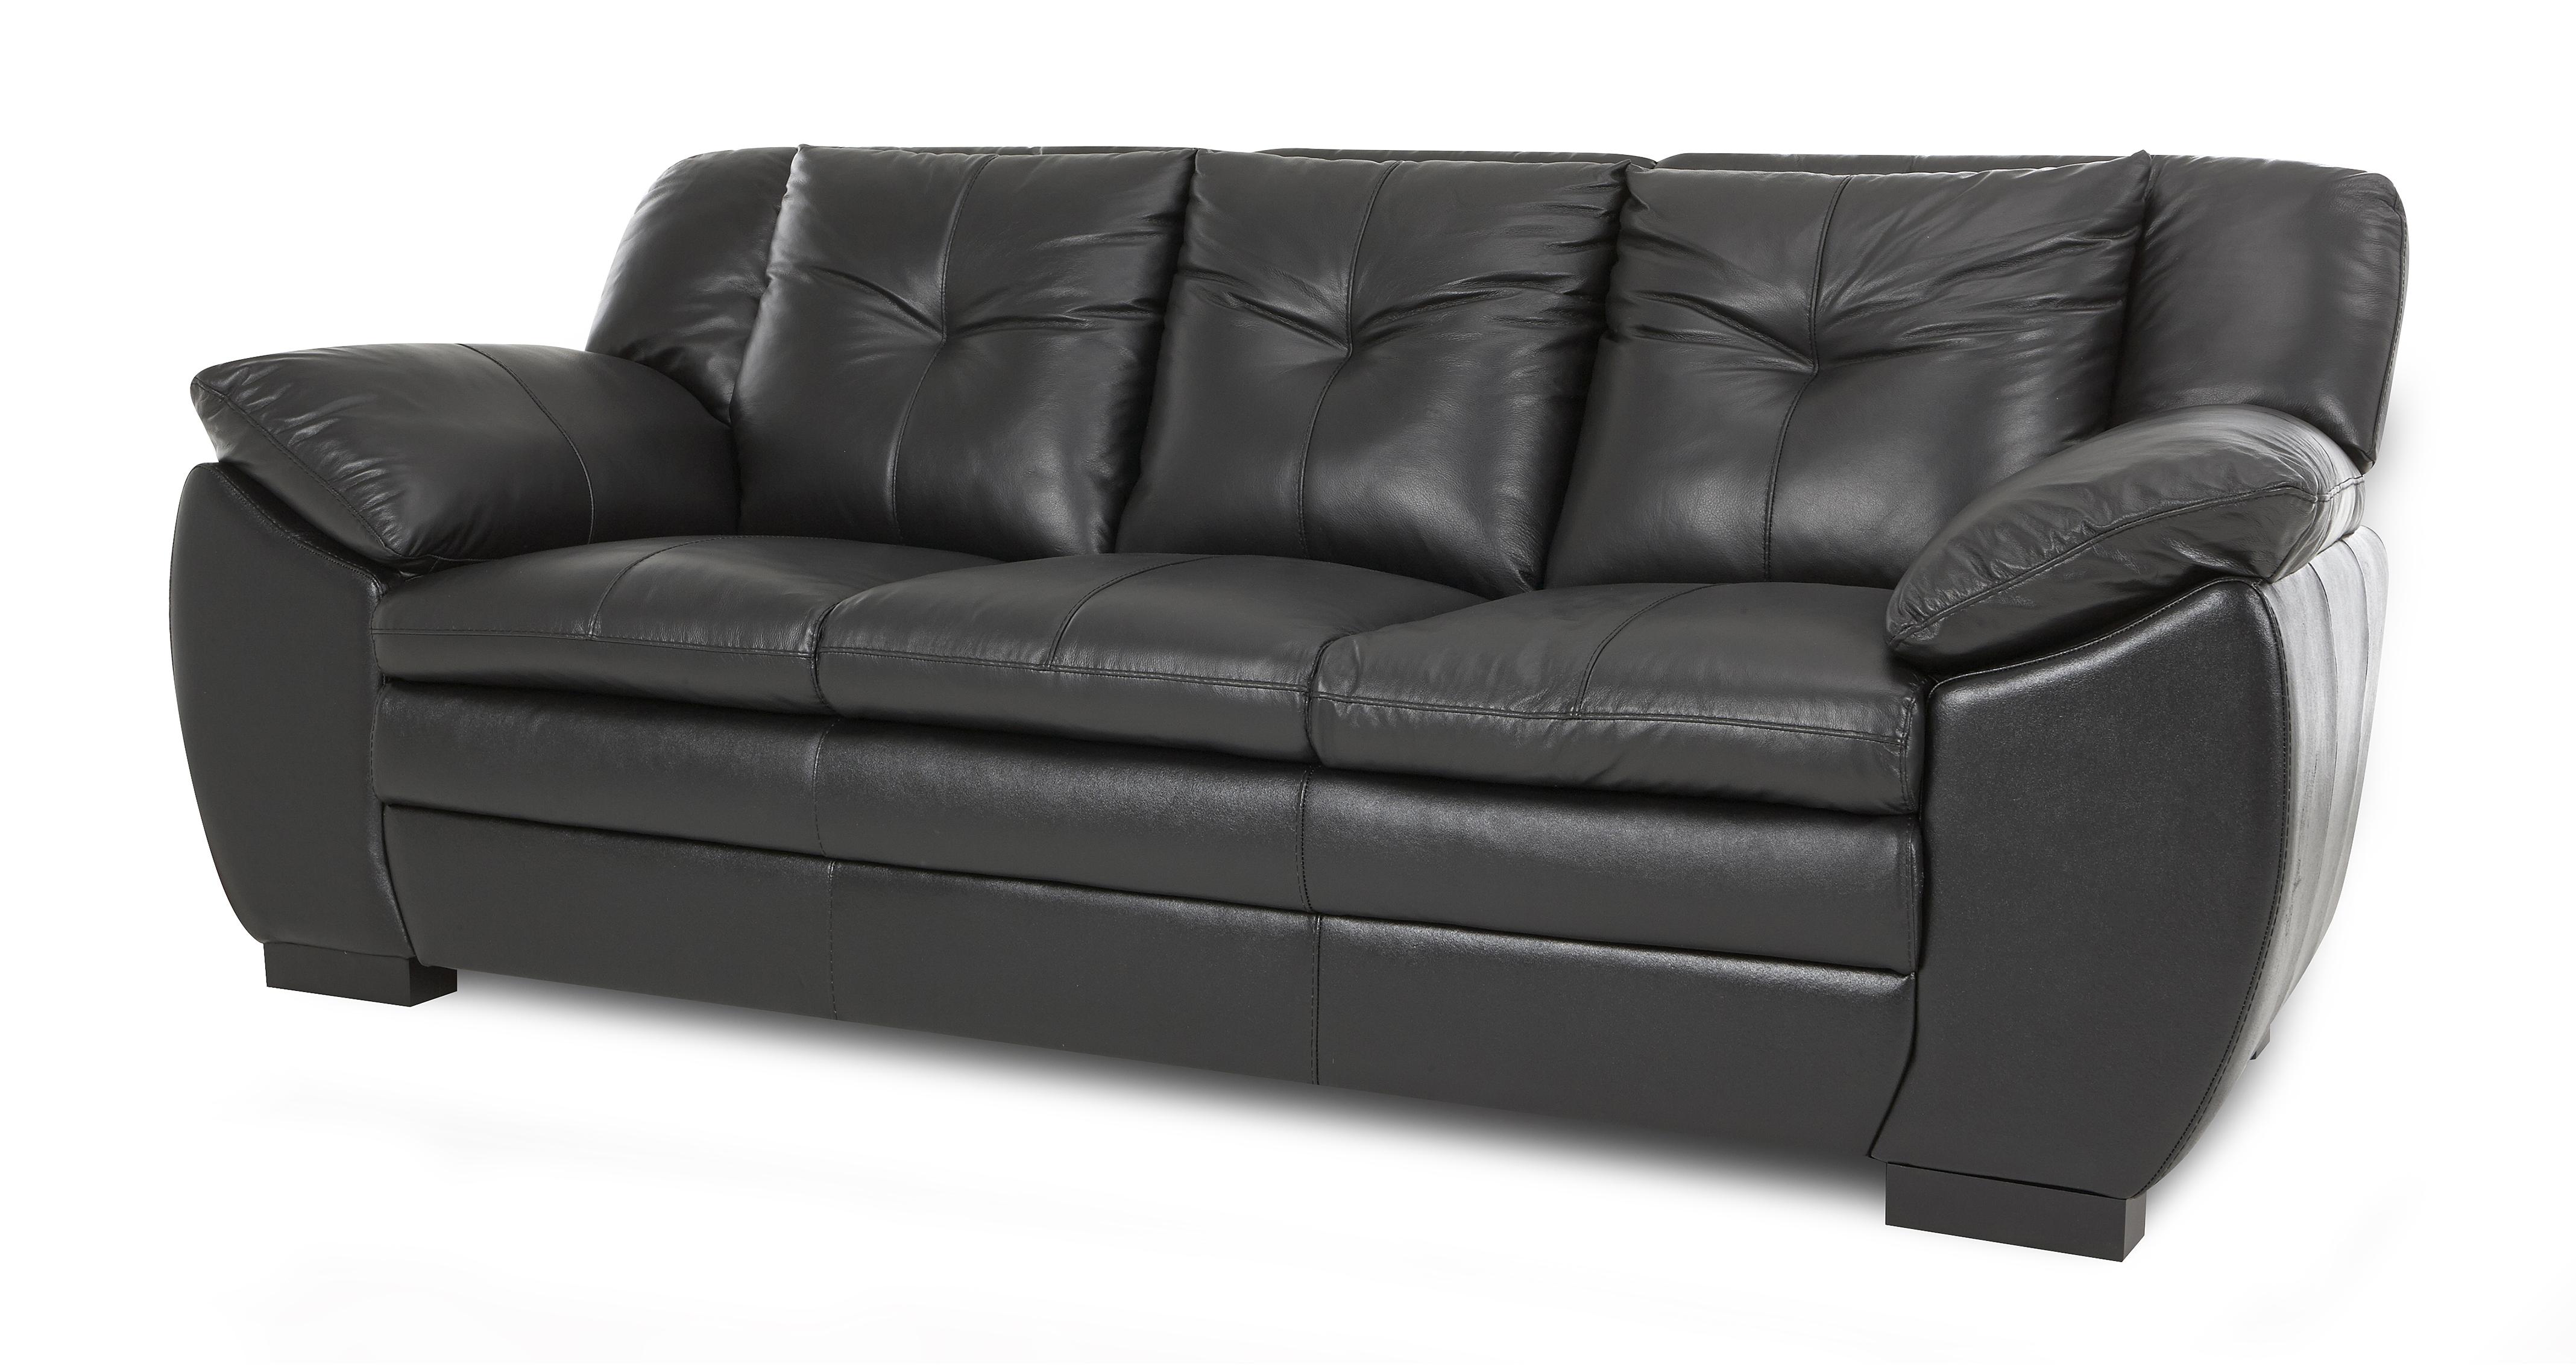 dfs leather sofa cushion replacement